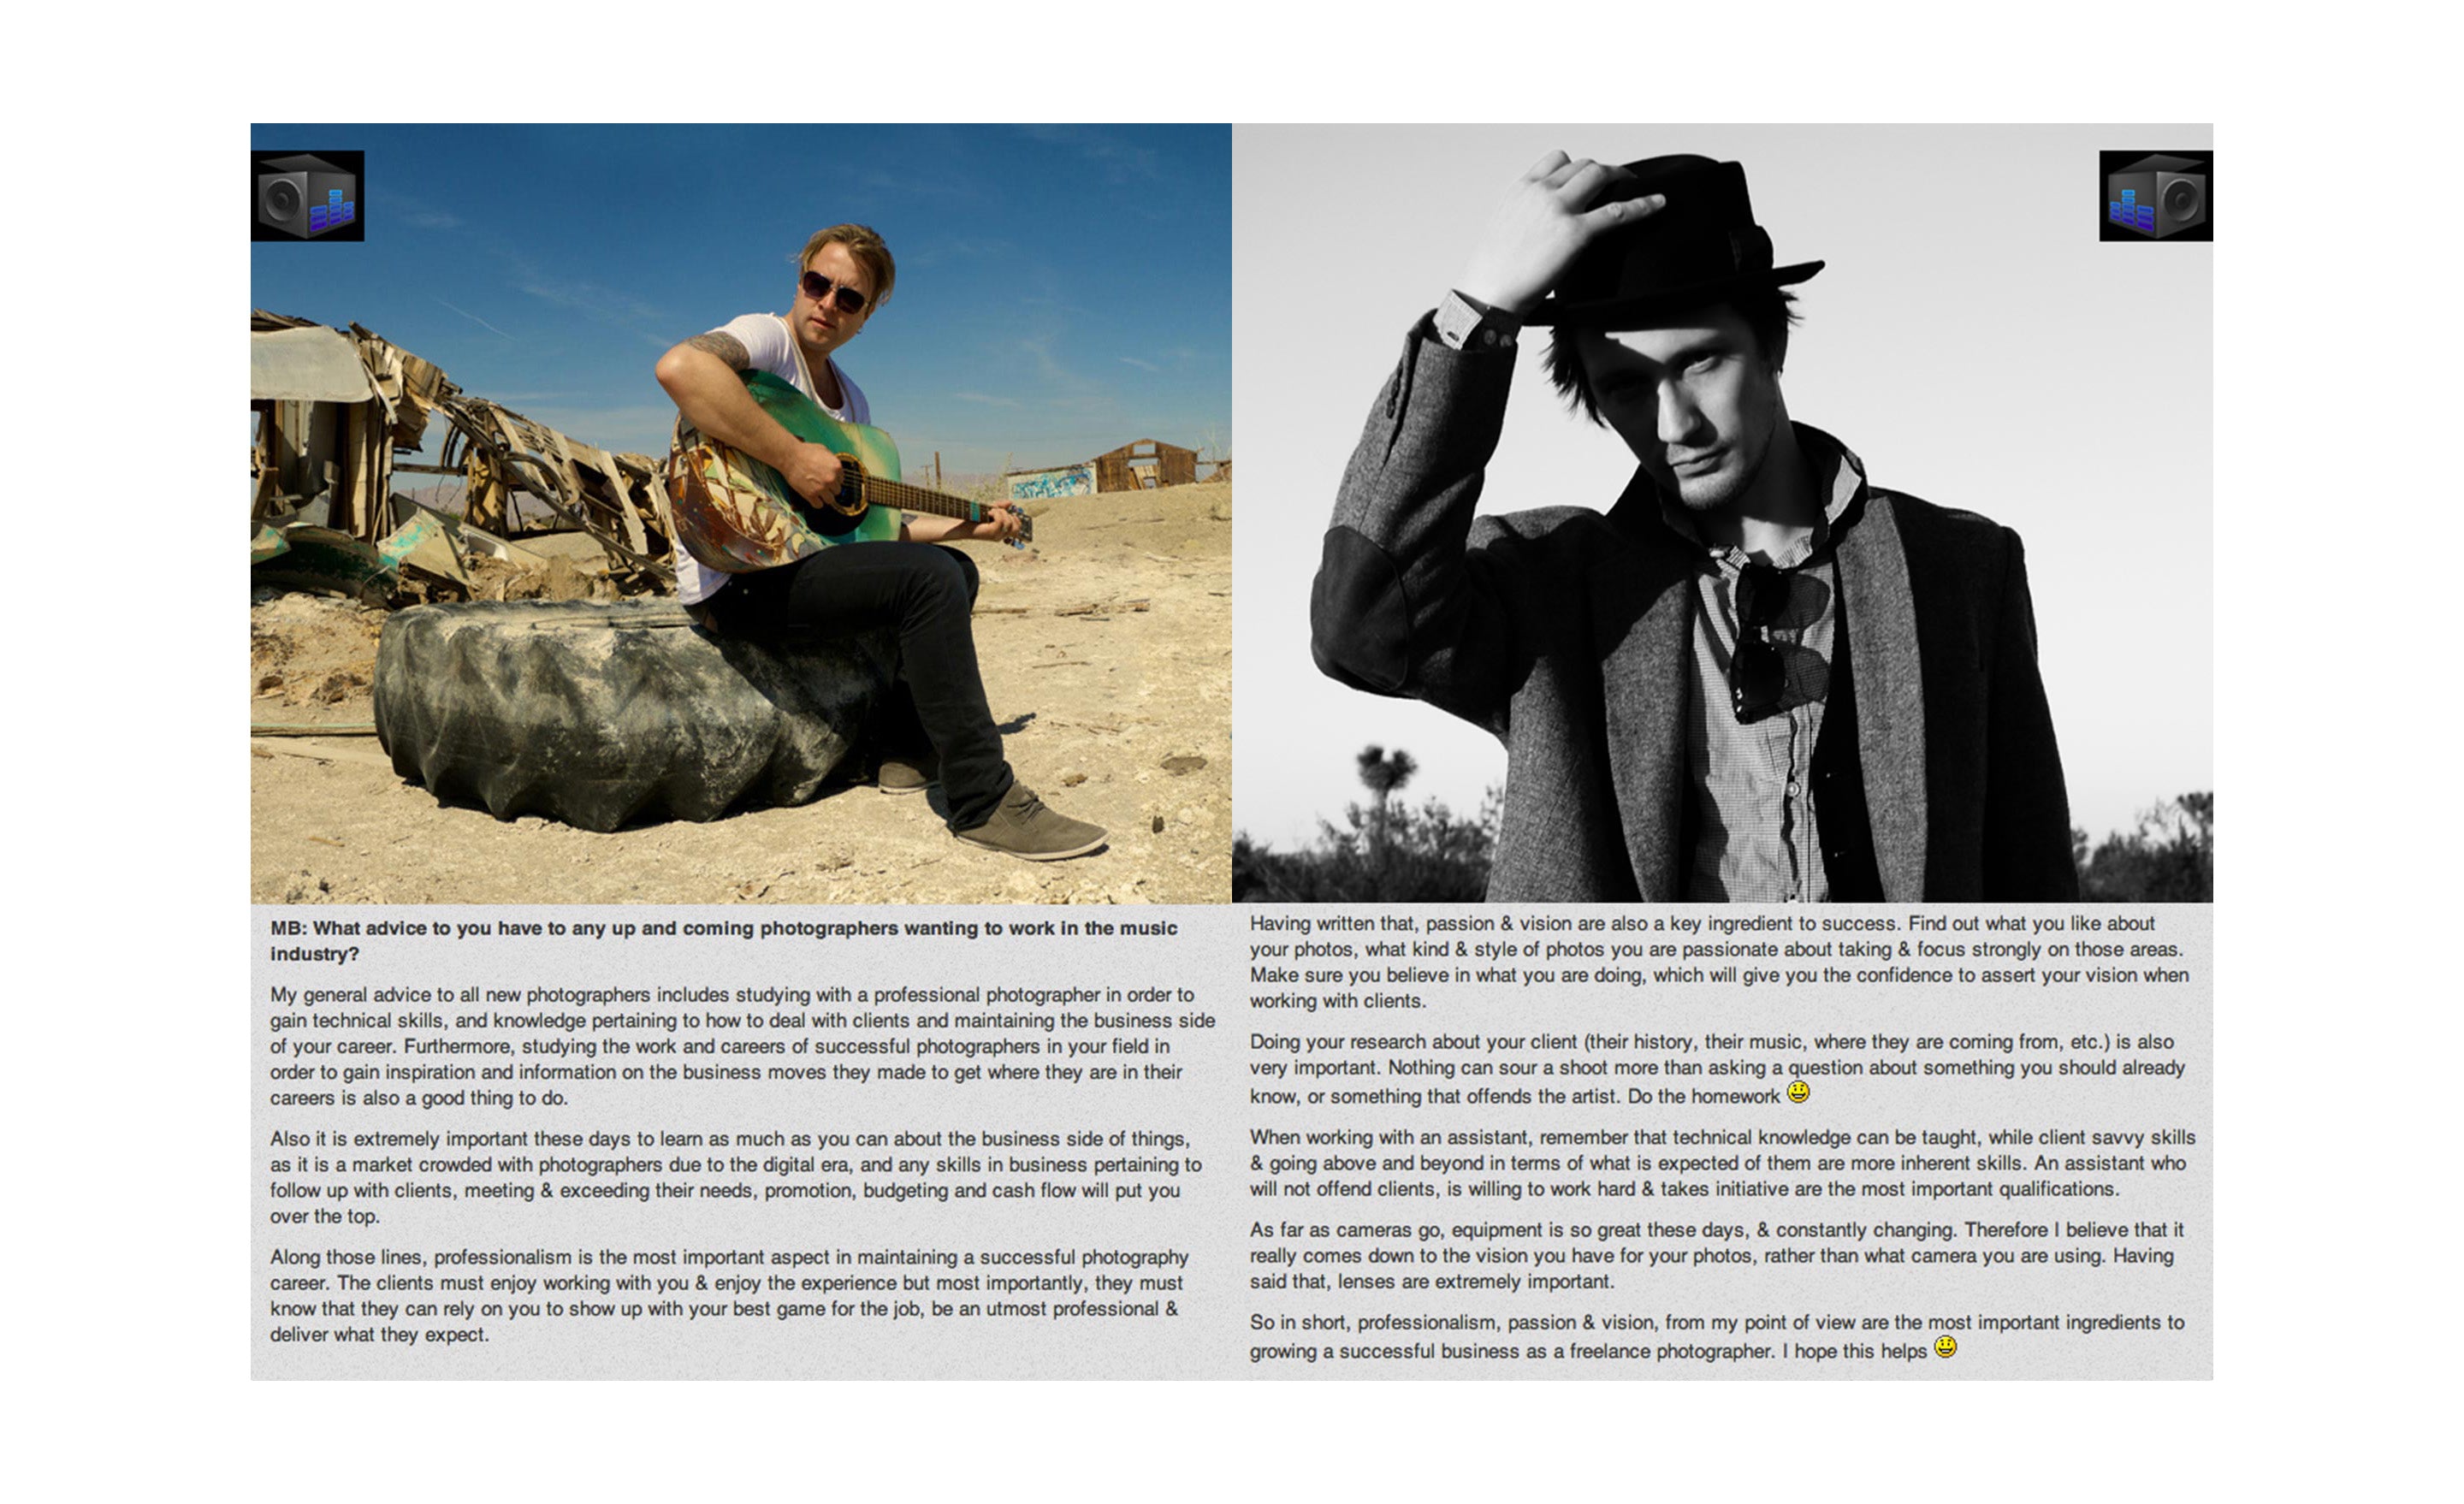 Los Angeles portrait photographer Mark Maryanovich Musicbox Artist Consulting interview page 2 photo of musician sitting on large rock in desert strumming guitar with black and white musician portrait artist standing in desert one hand to his hat sunglasses tucked in his shirt collar on opposite side both images placed above text